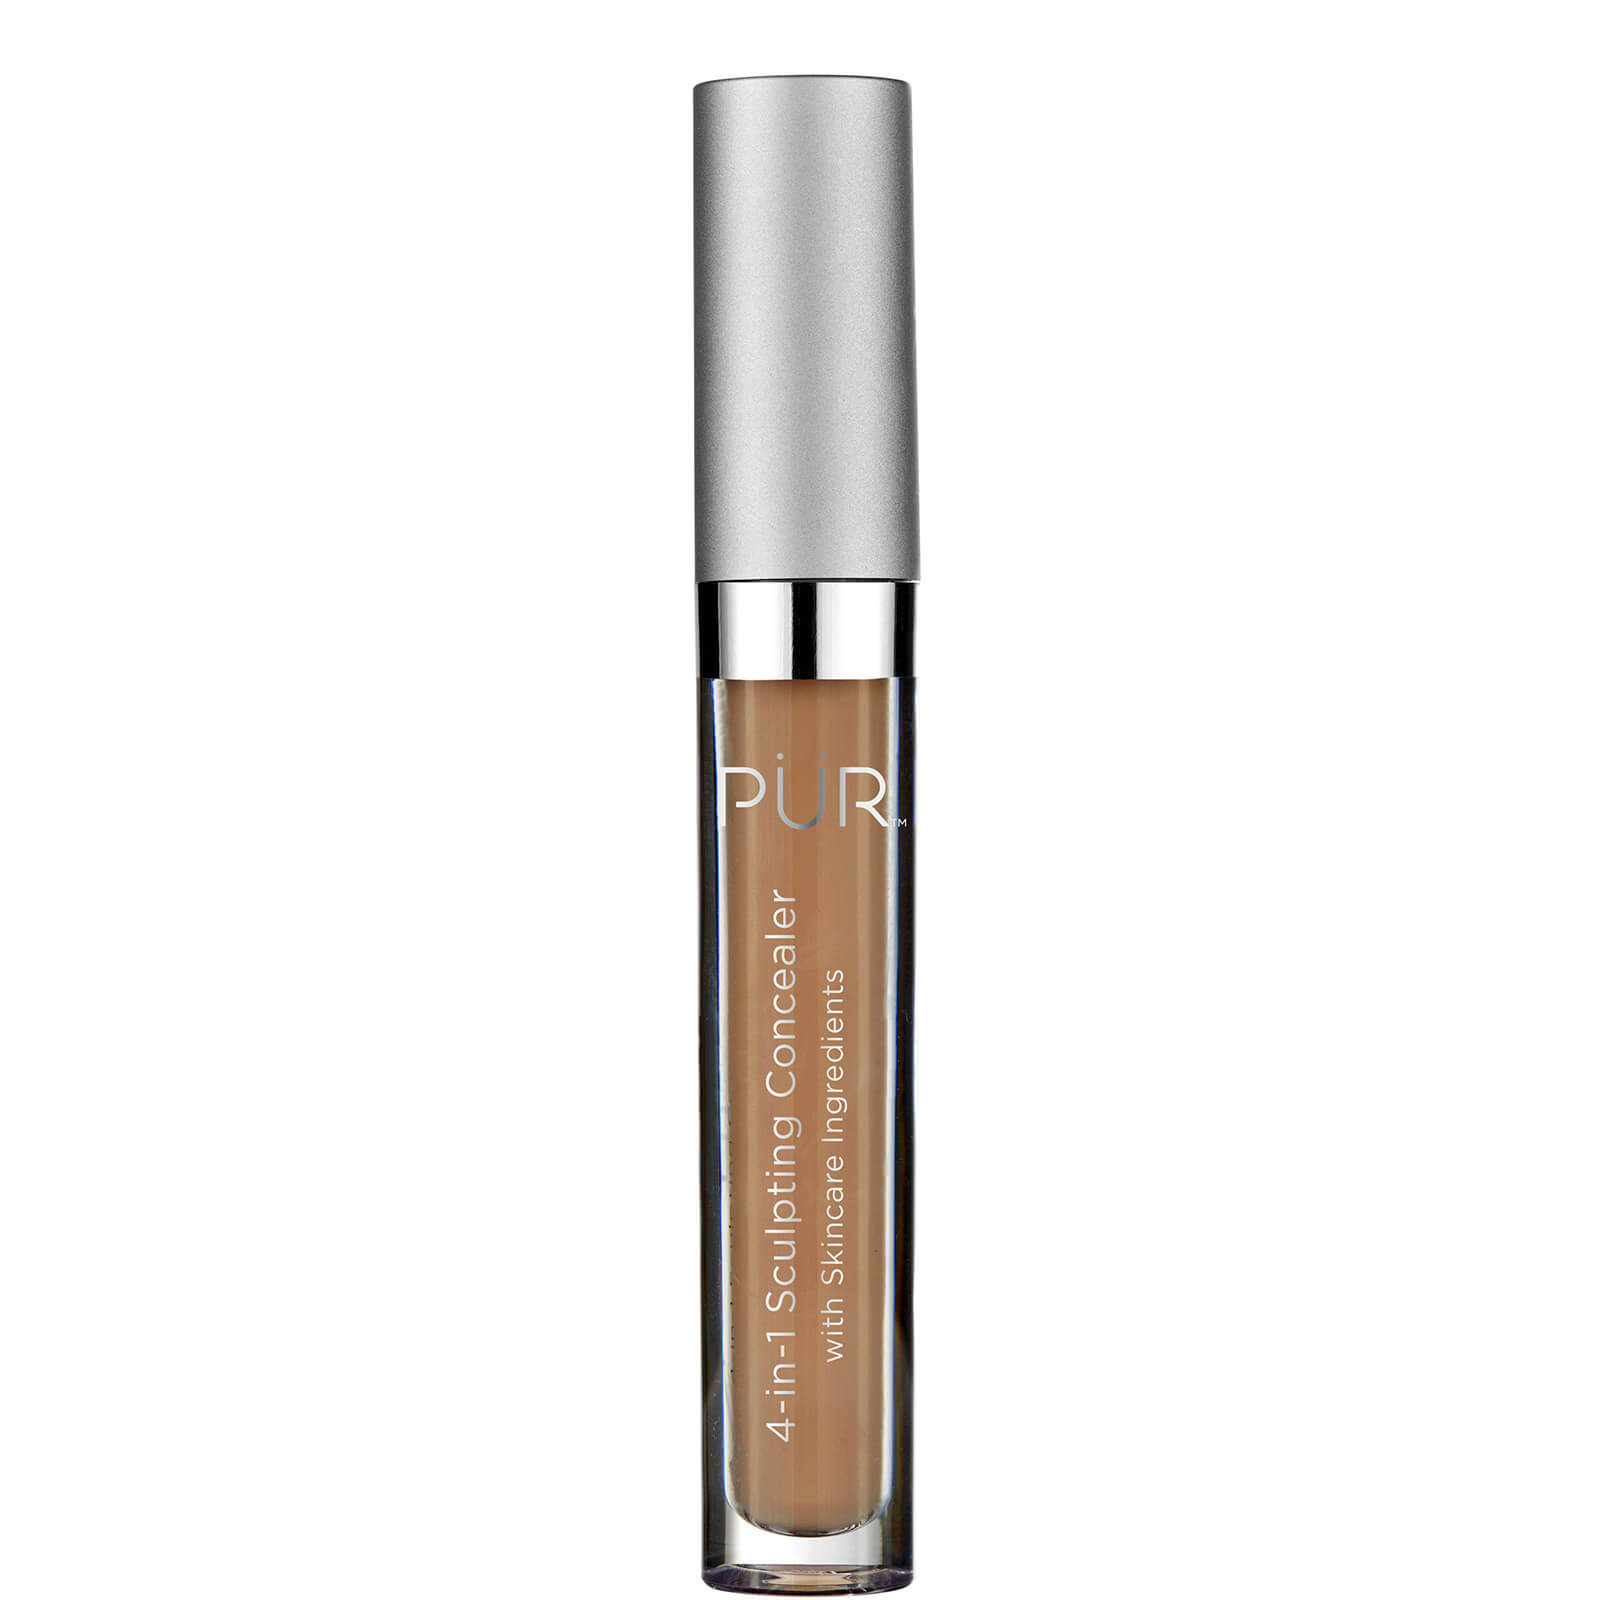 PÜR Push Up 4-in-1 Sculpting Concealer 3.76g (Various Shades) - DN5